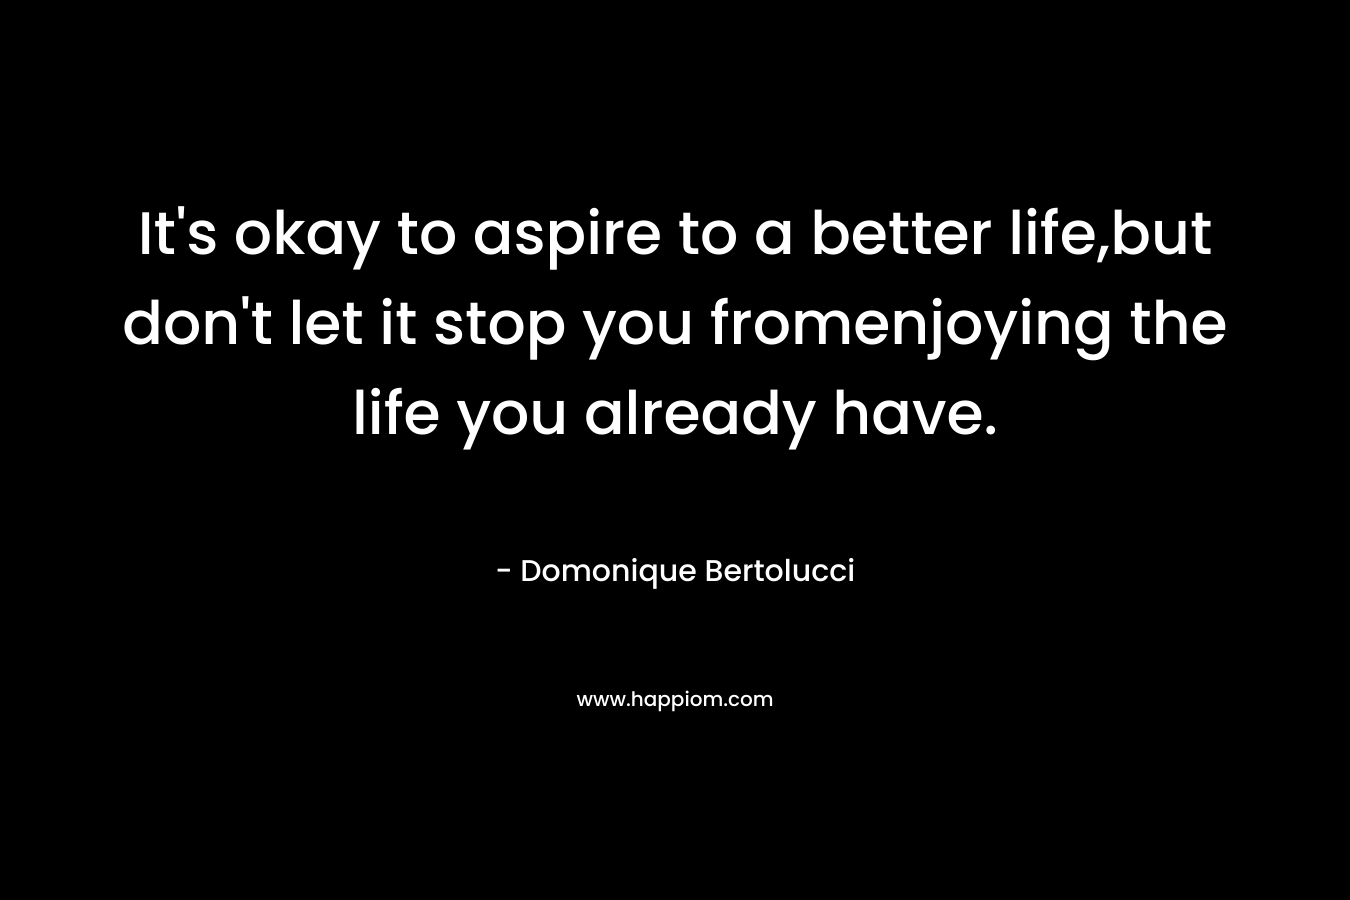 It's okay to aspire to a better life,but don't let it stop you fromenjoying the life you already have.